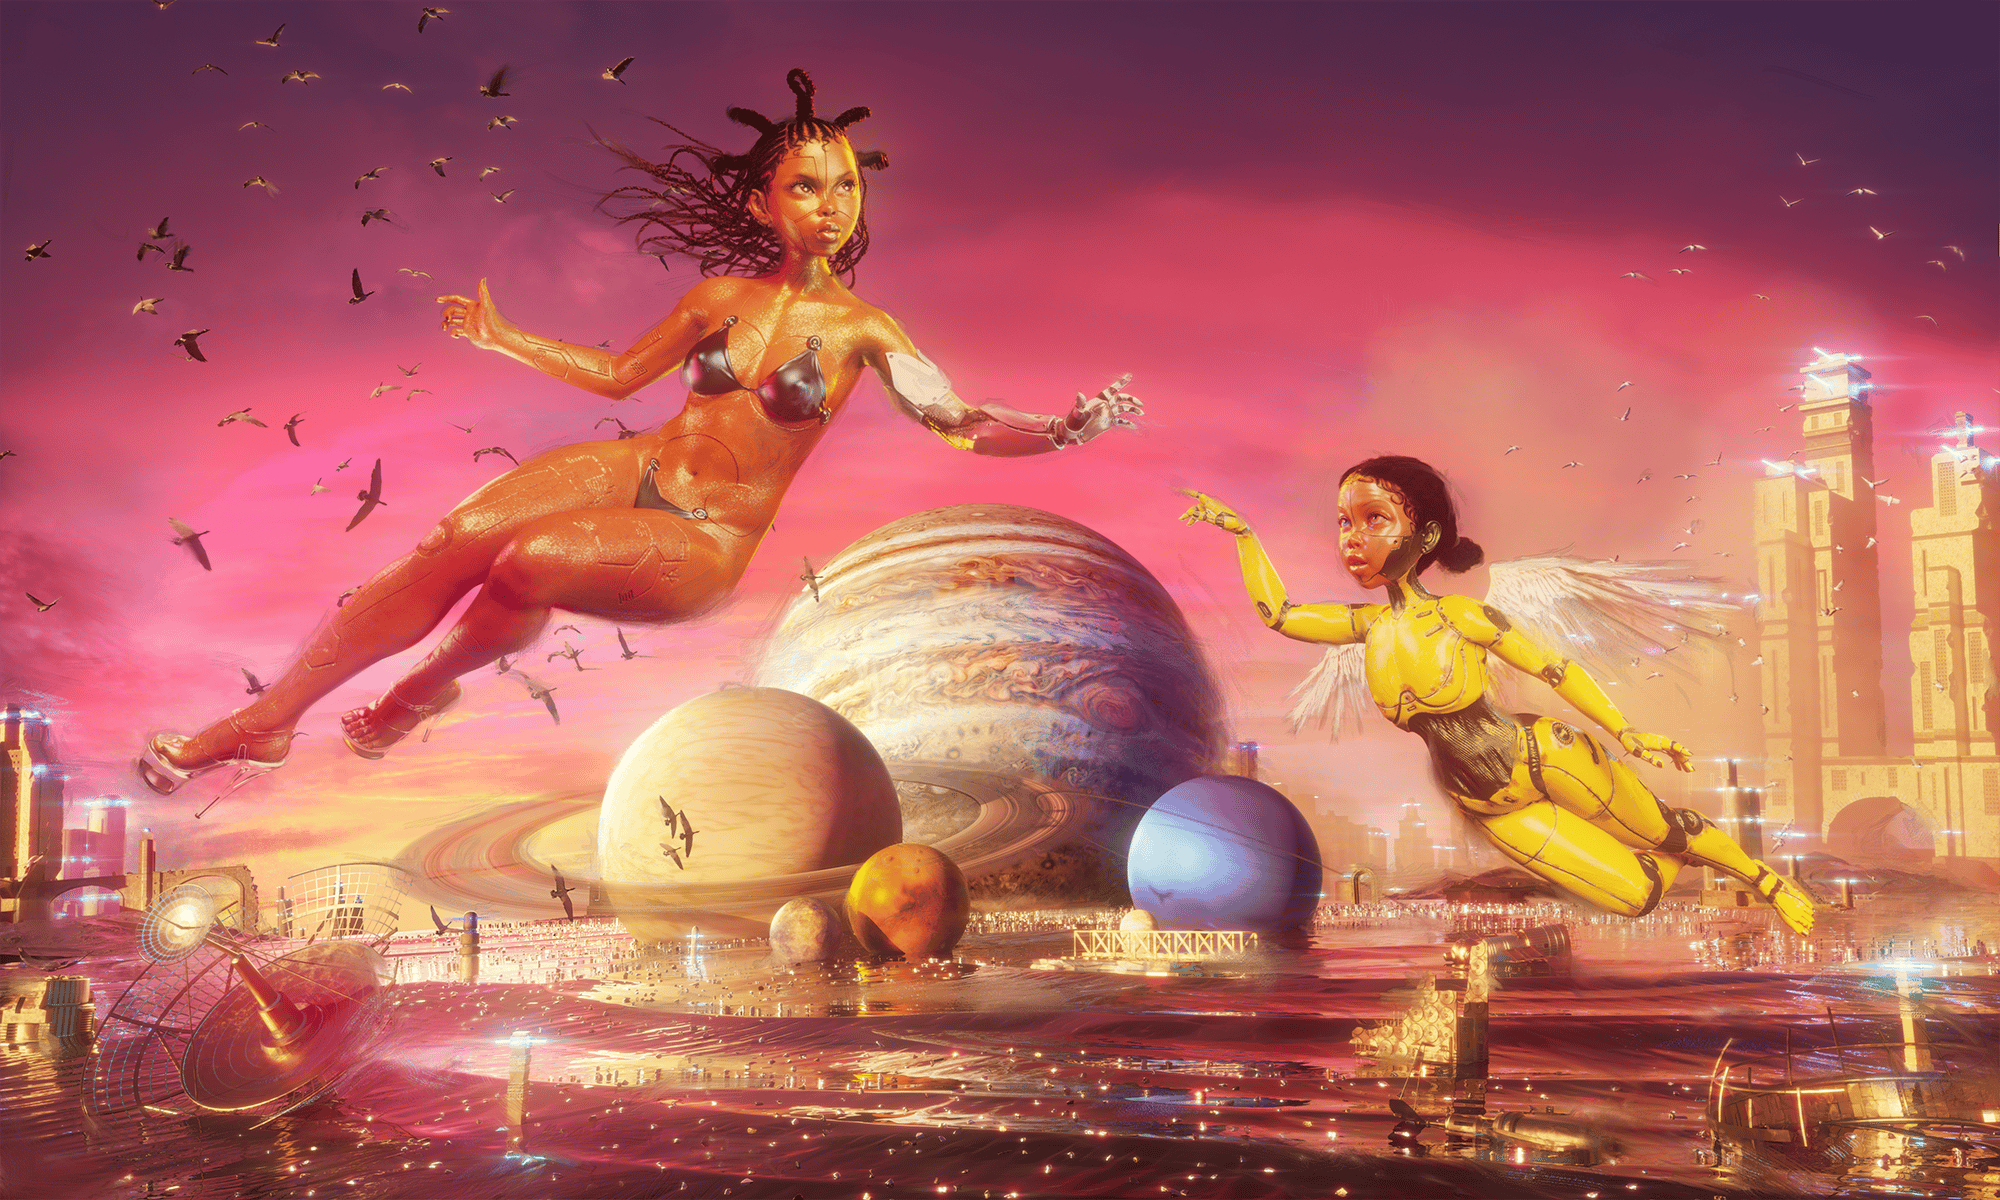 An other-worldly image showing an abstract futuristic skyline with two feminine figures in a position similar to Michelangelo's painting The Creation of Adam.